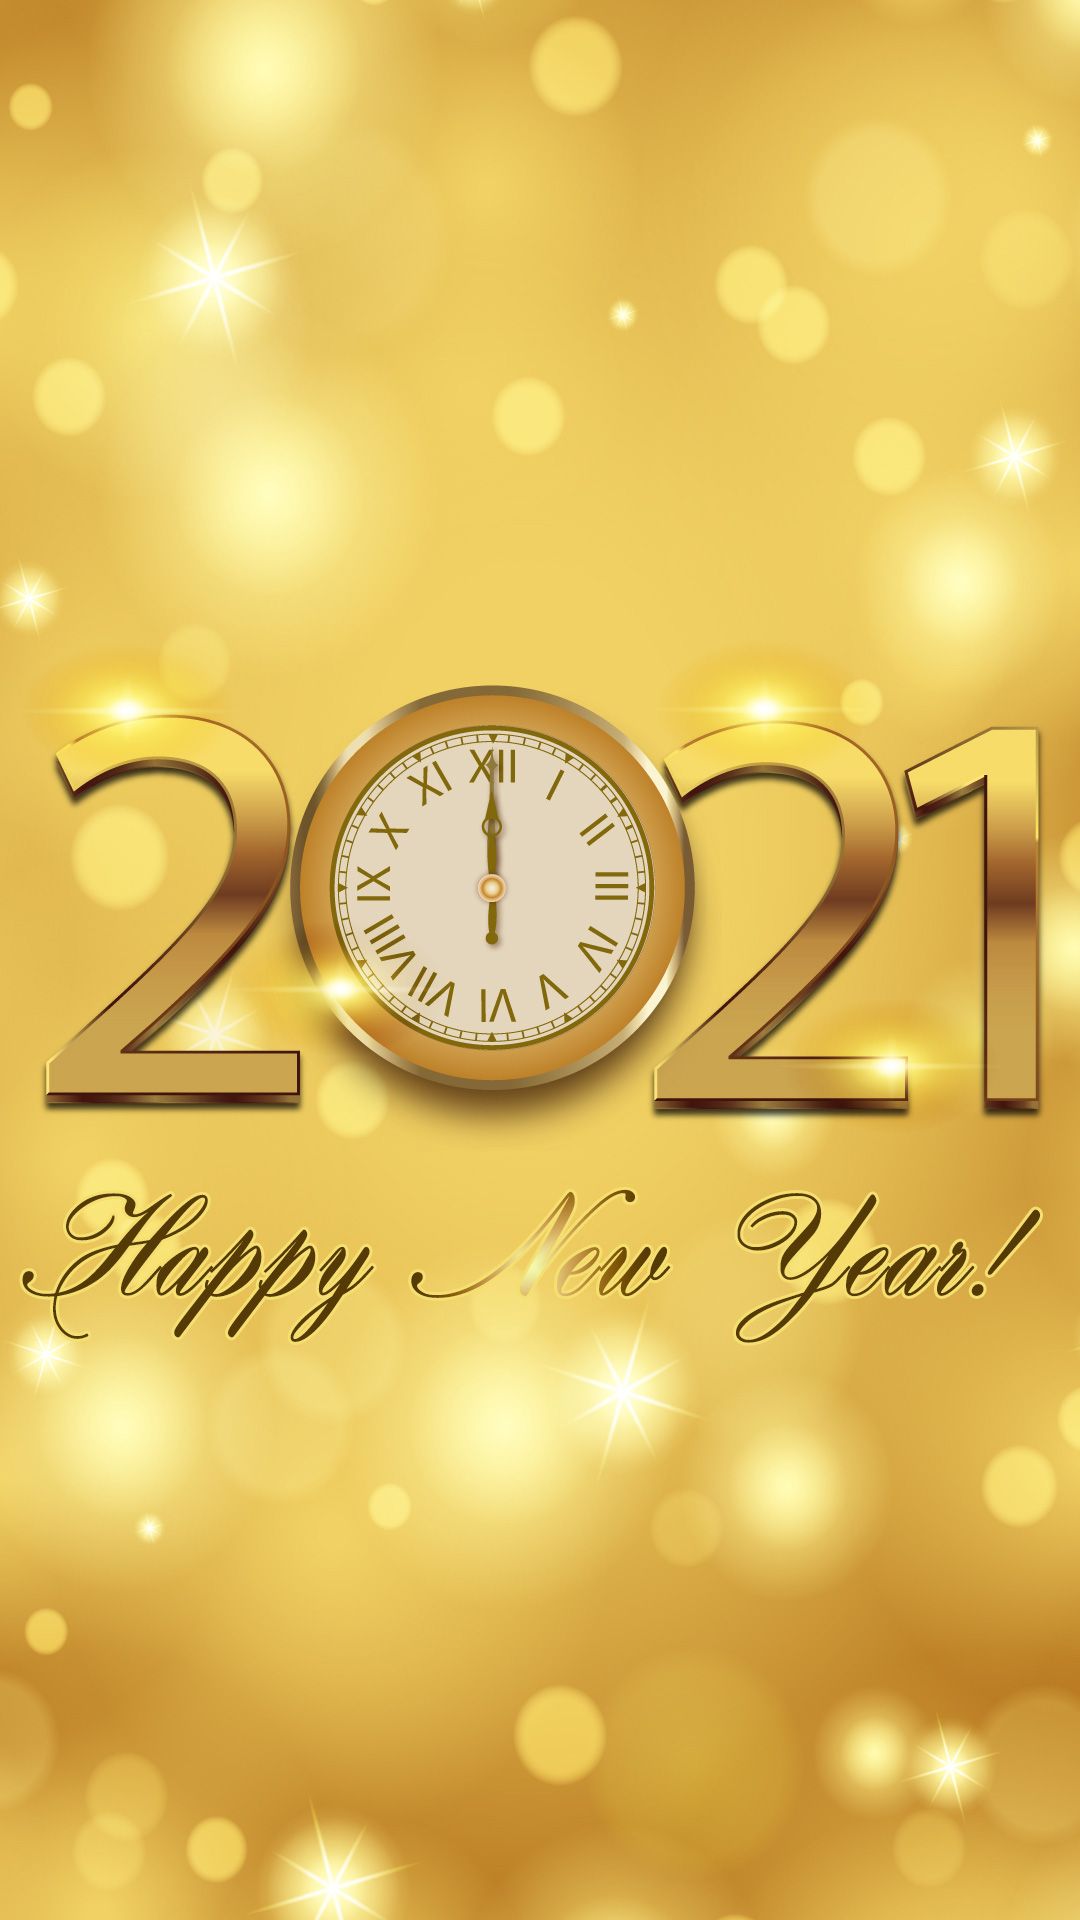 Happy New Year 2021 Wallpapers - Wallpaper Cave